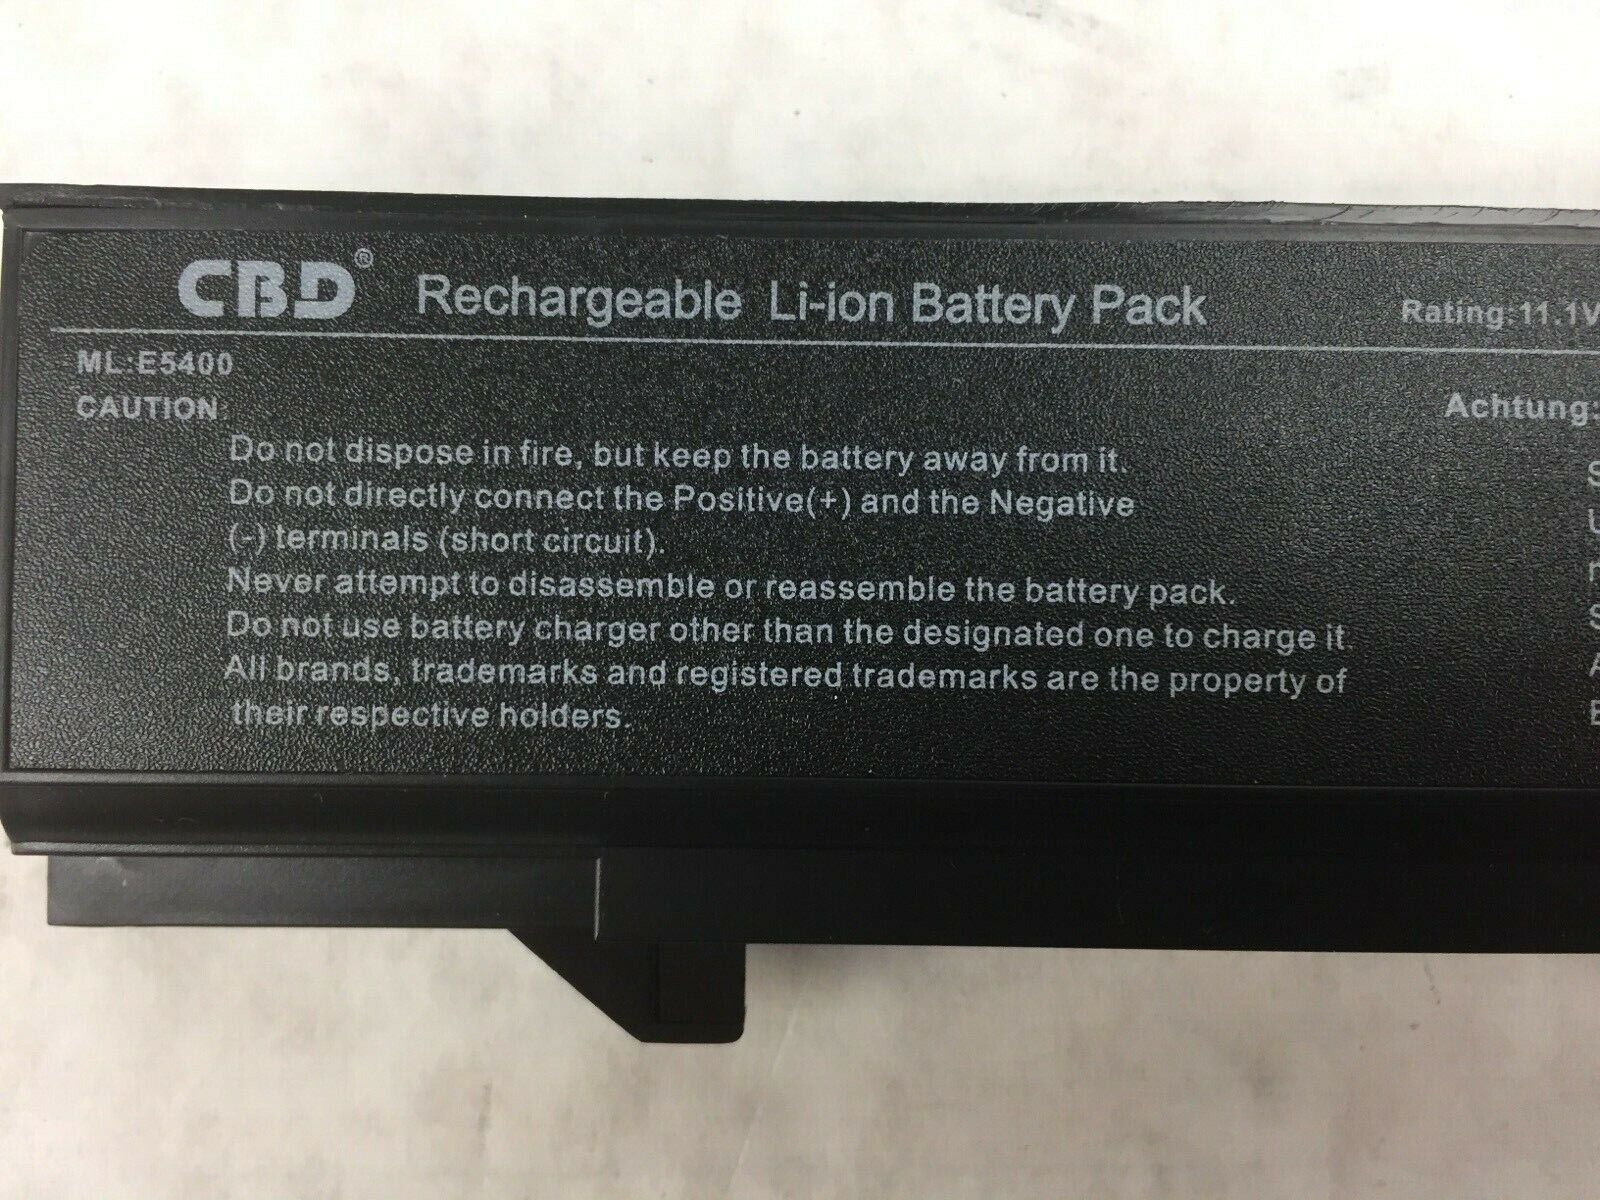 CBD Rechargeable Li-ion Battery Pack for Dell Latitude E5400 Laptop